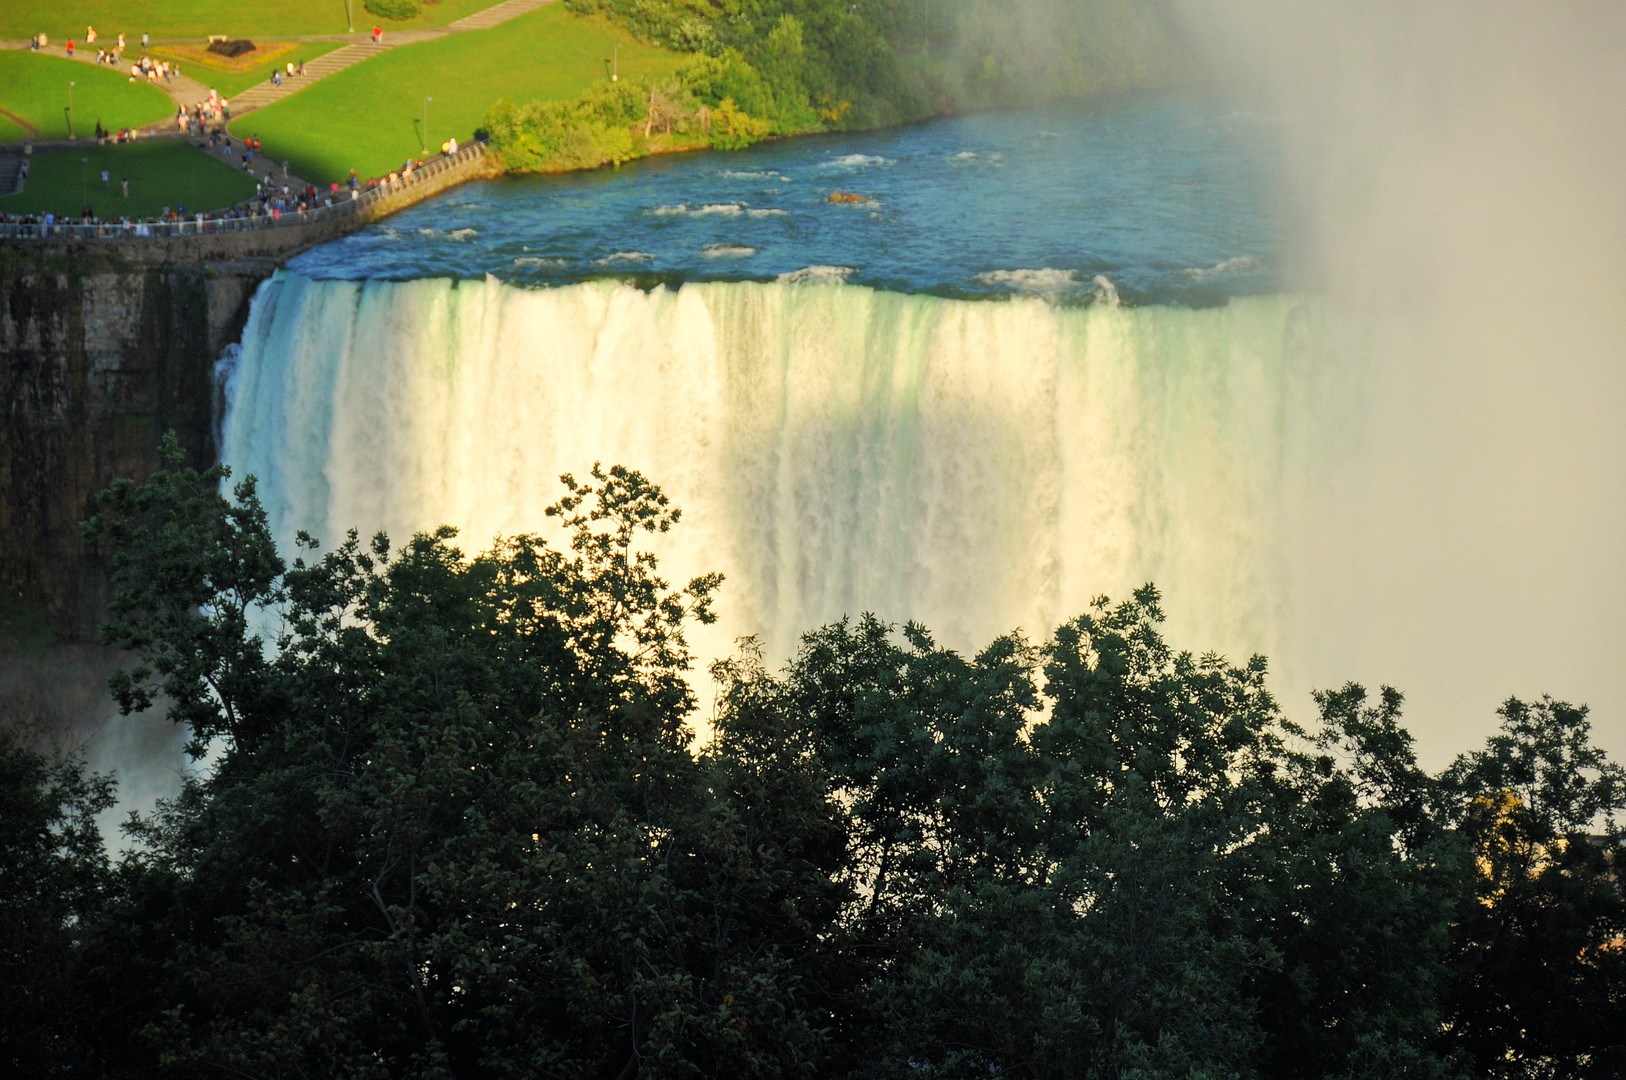 Another shot of Niagara Fall from hotel room